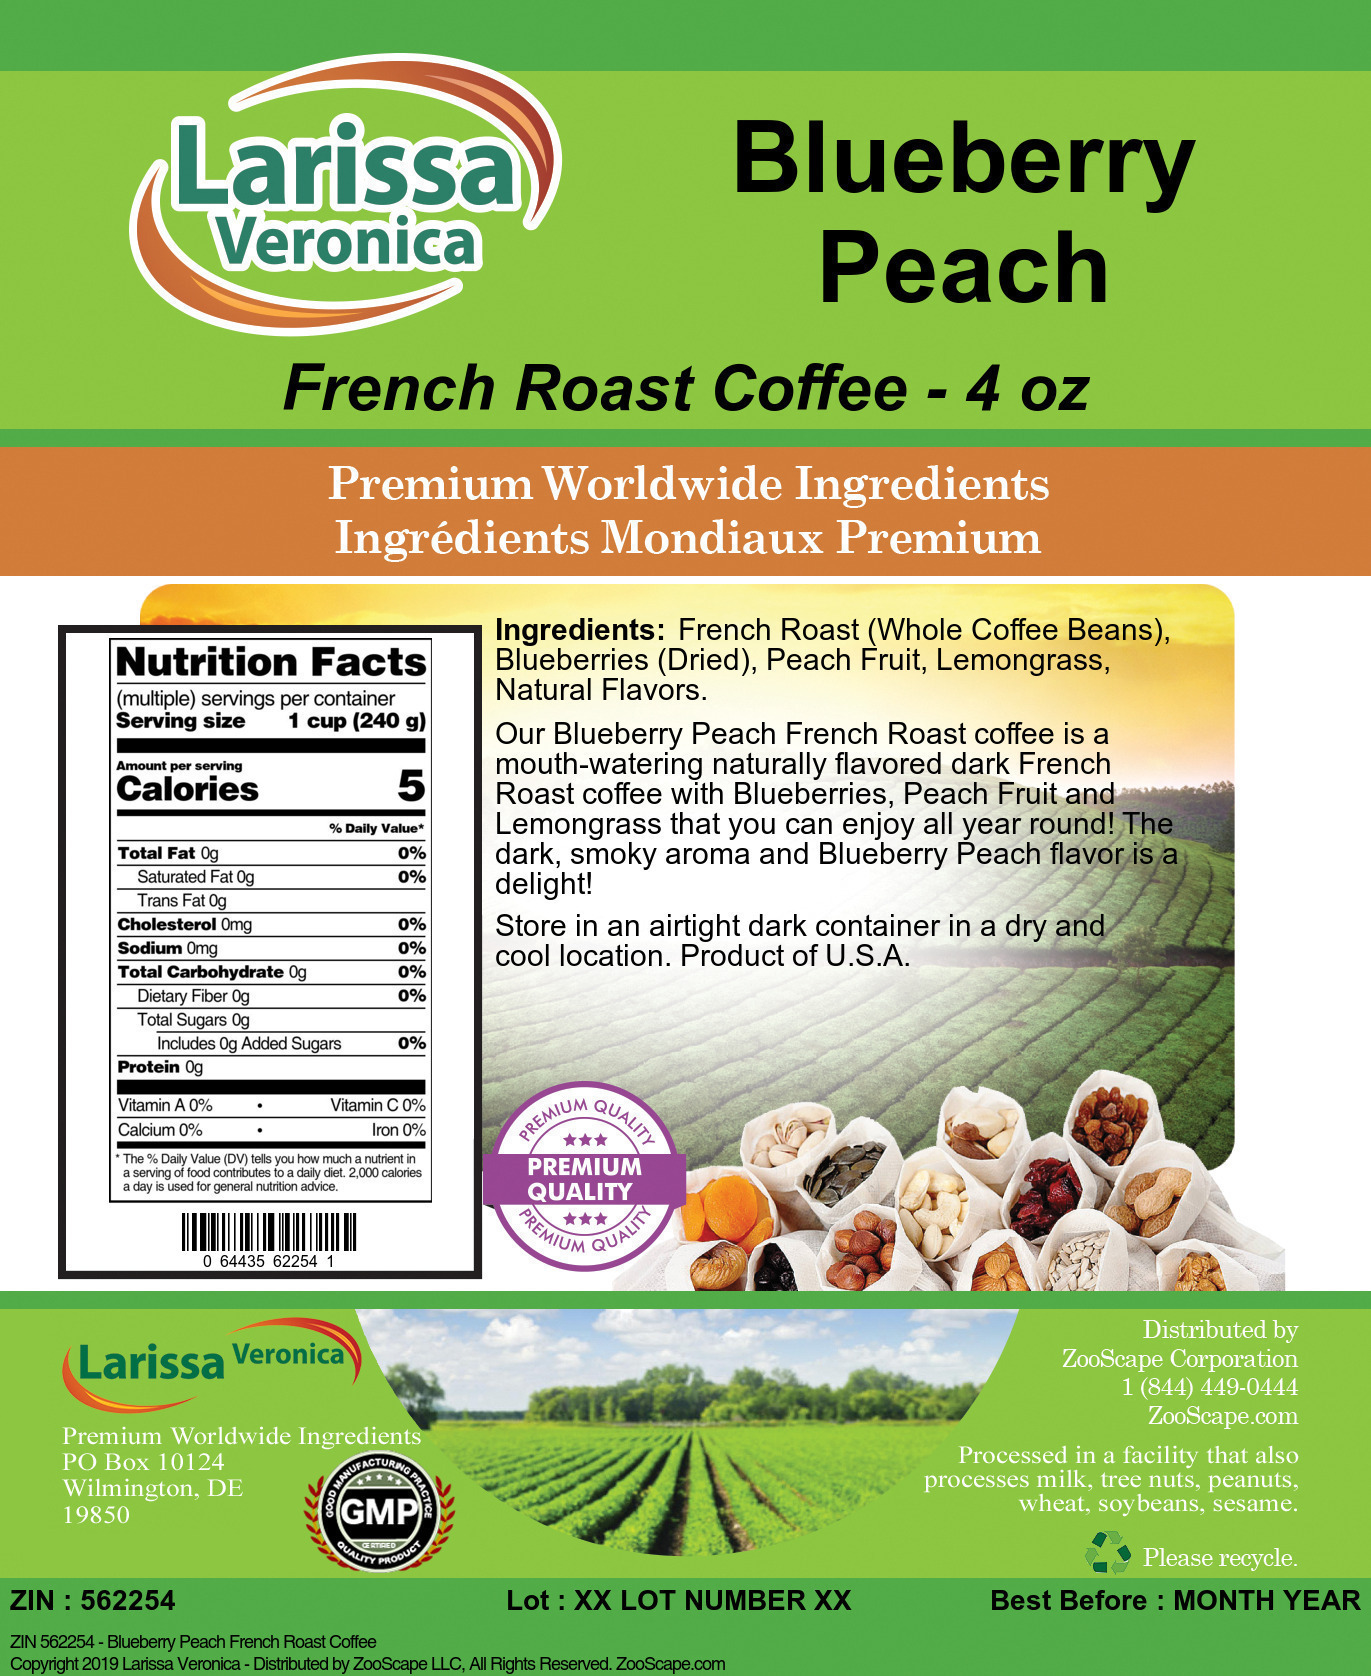 Blueberry Peach French Roast Coffee - Label